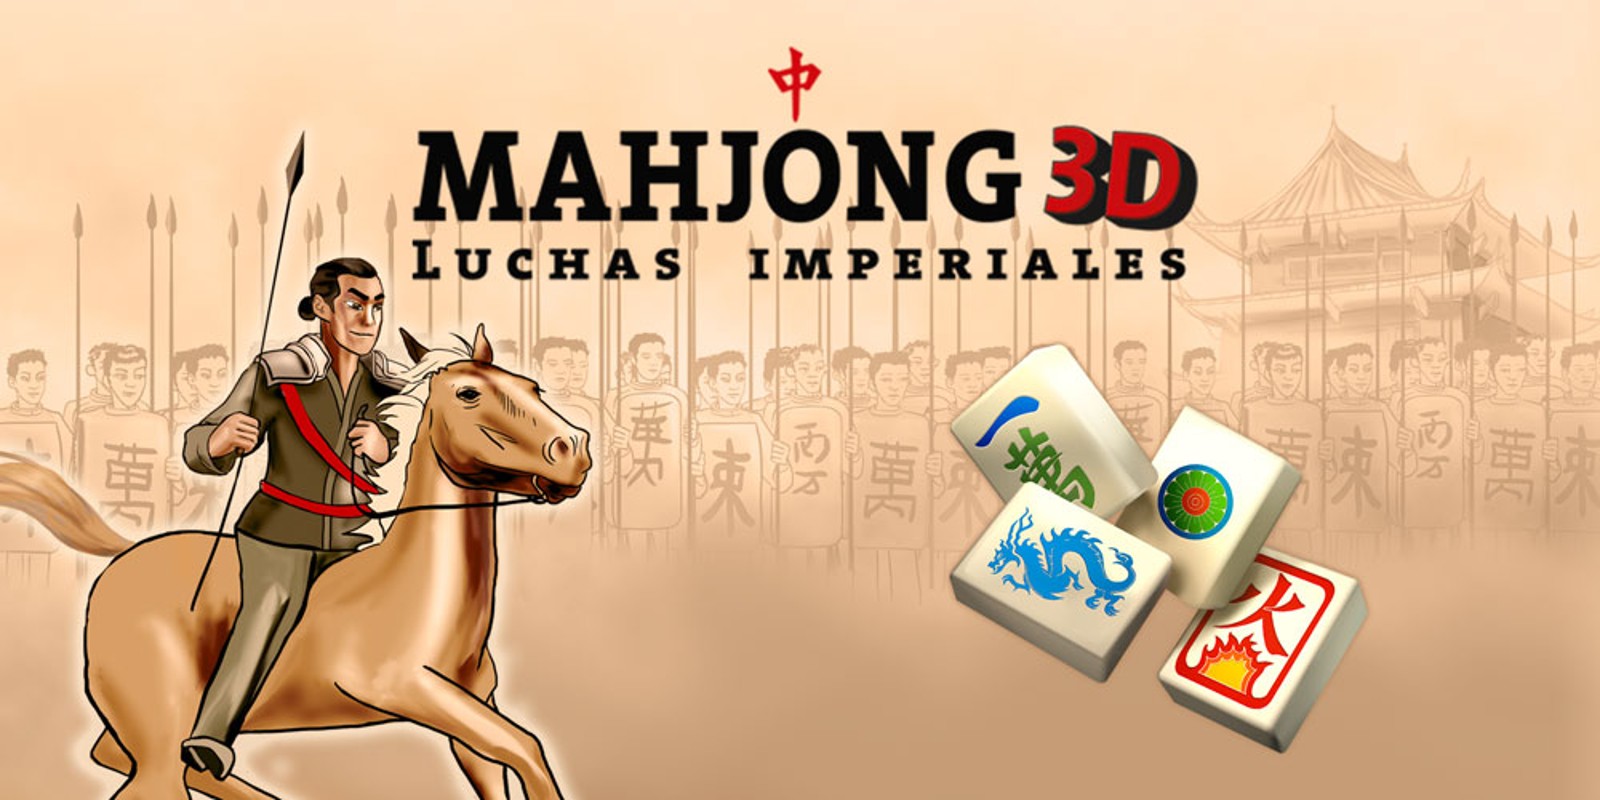 Mahjong 3D –  Luchas imperiales